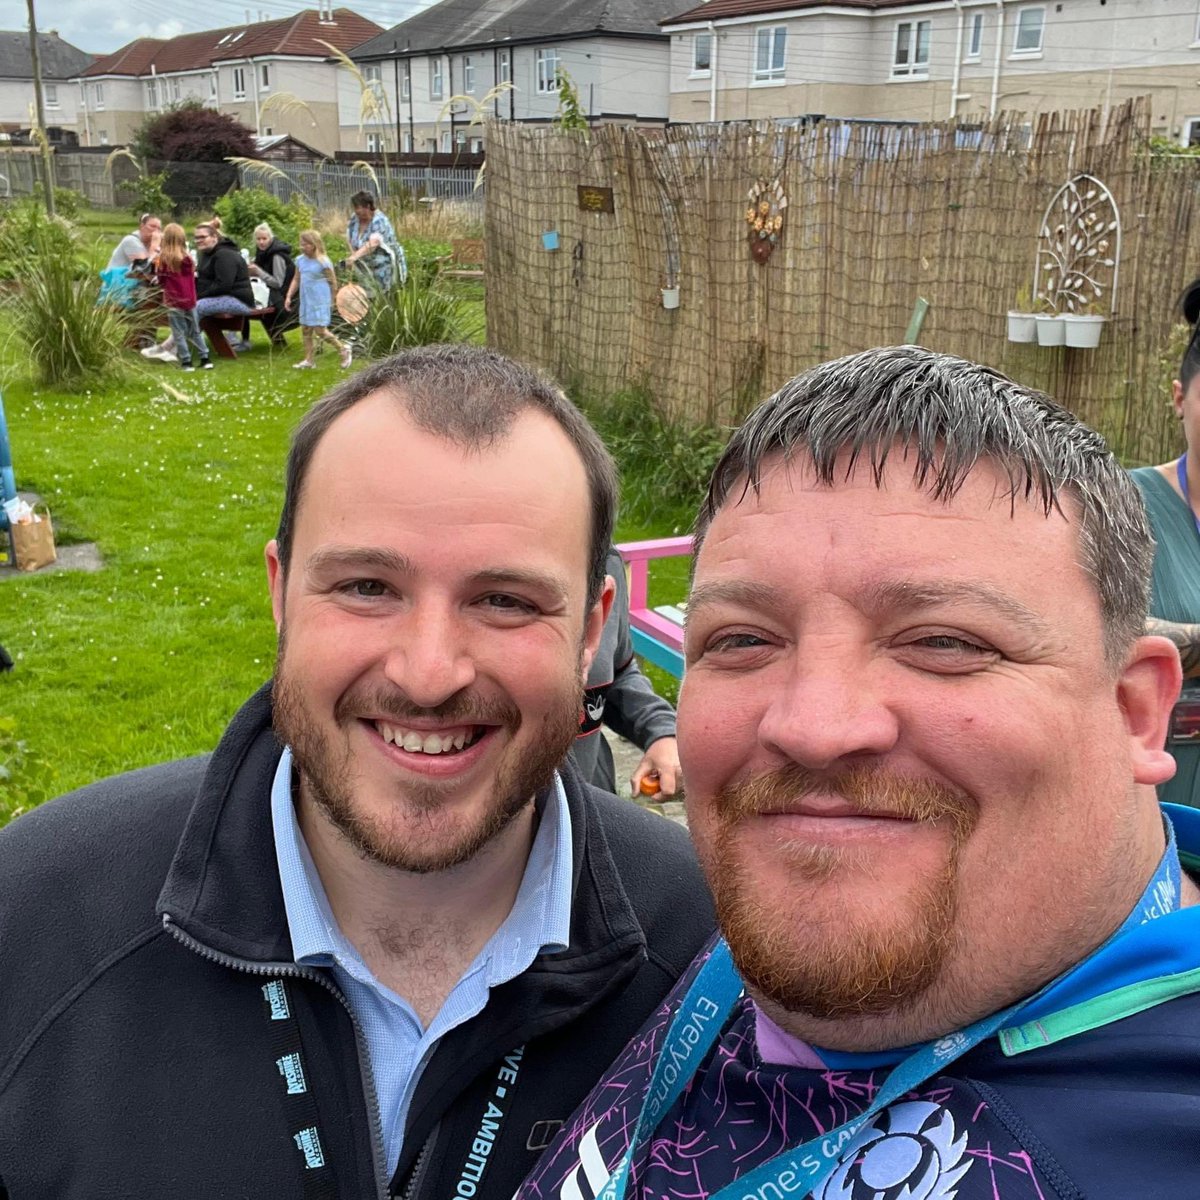 What an amazing community engagement event - there was such a buzz! 🤩

Great to catch up with @SA_YouthWork member & top bloke, Stuart from RoomSixty too! 😁

Looking forward to the next one at Newton Primary on Saturday 29th July at 12 noon!

#SASummer23
#AyrNorthFamilyFunTour